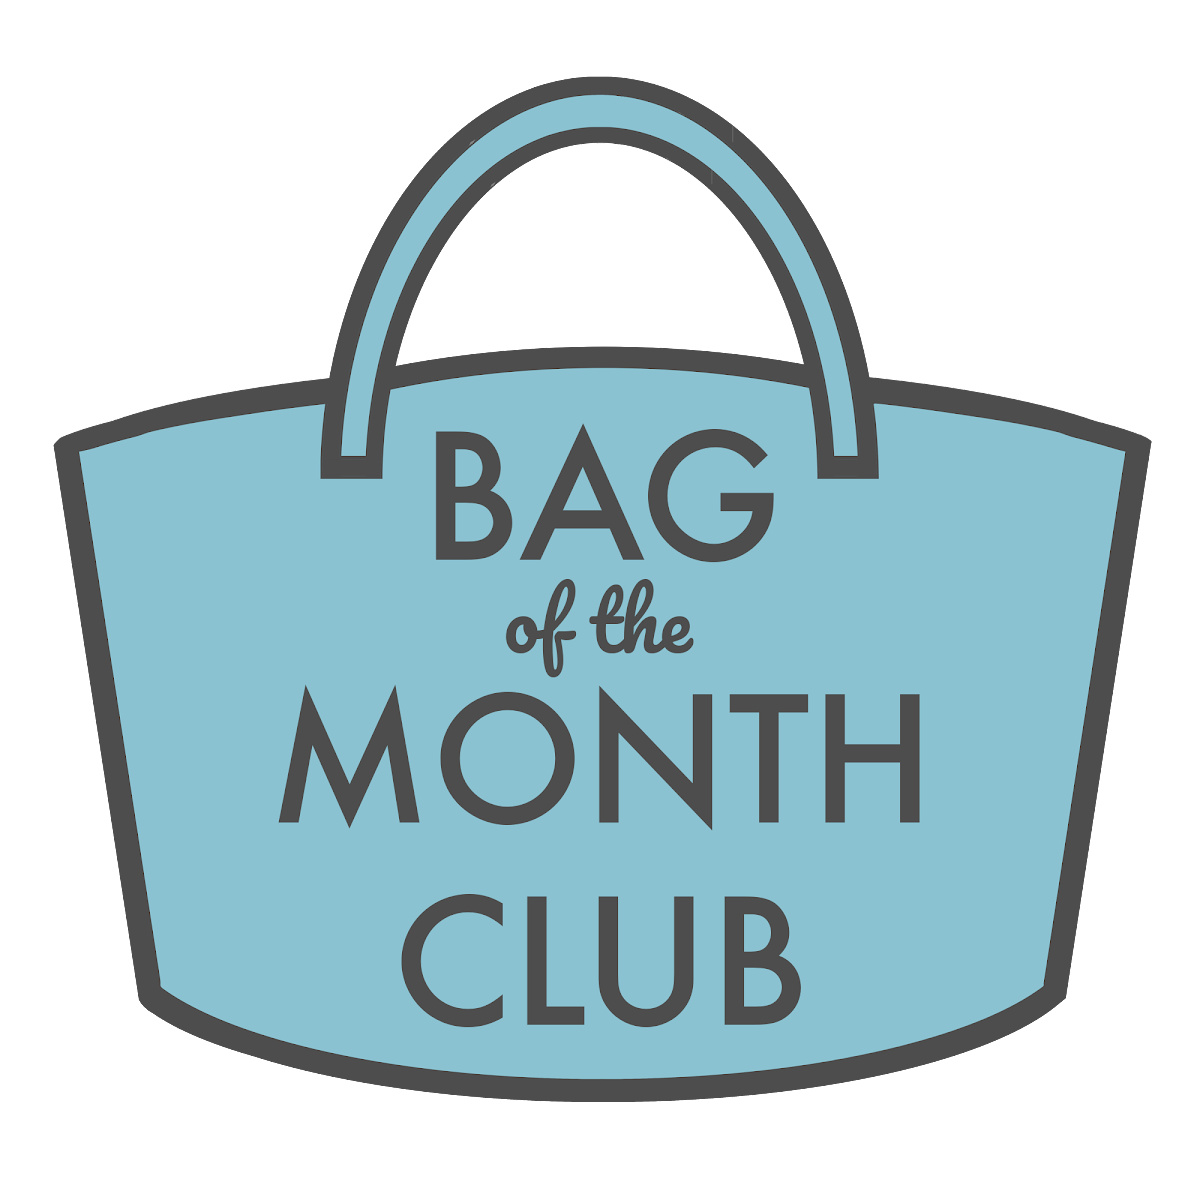 A blue bag silhouette with grey text reading 'Bag of the Month Club'